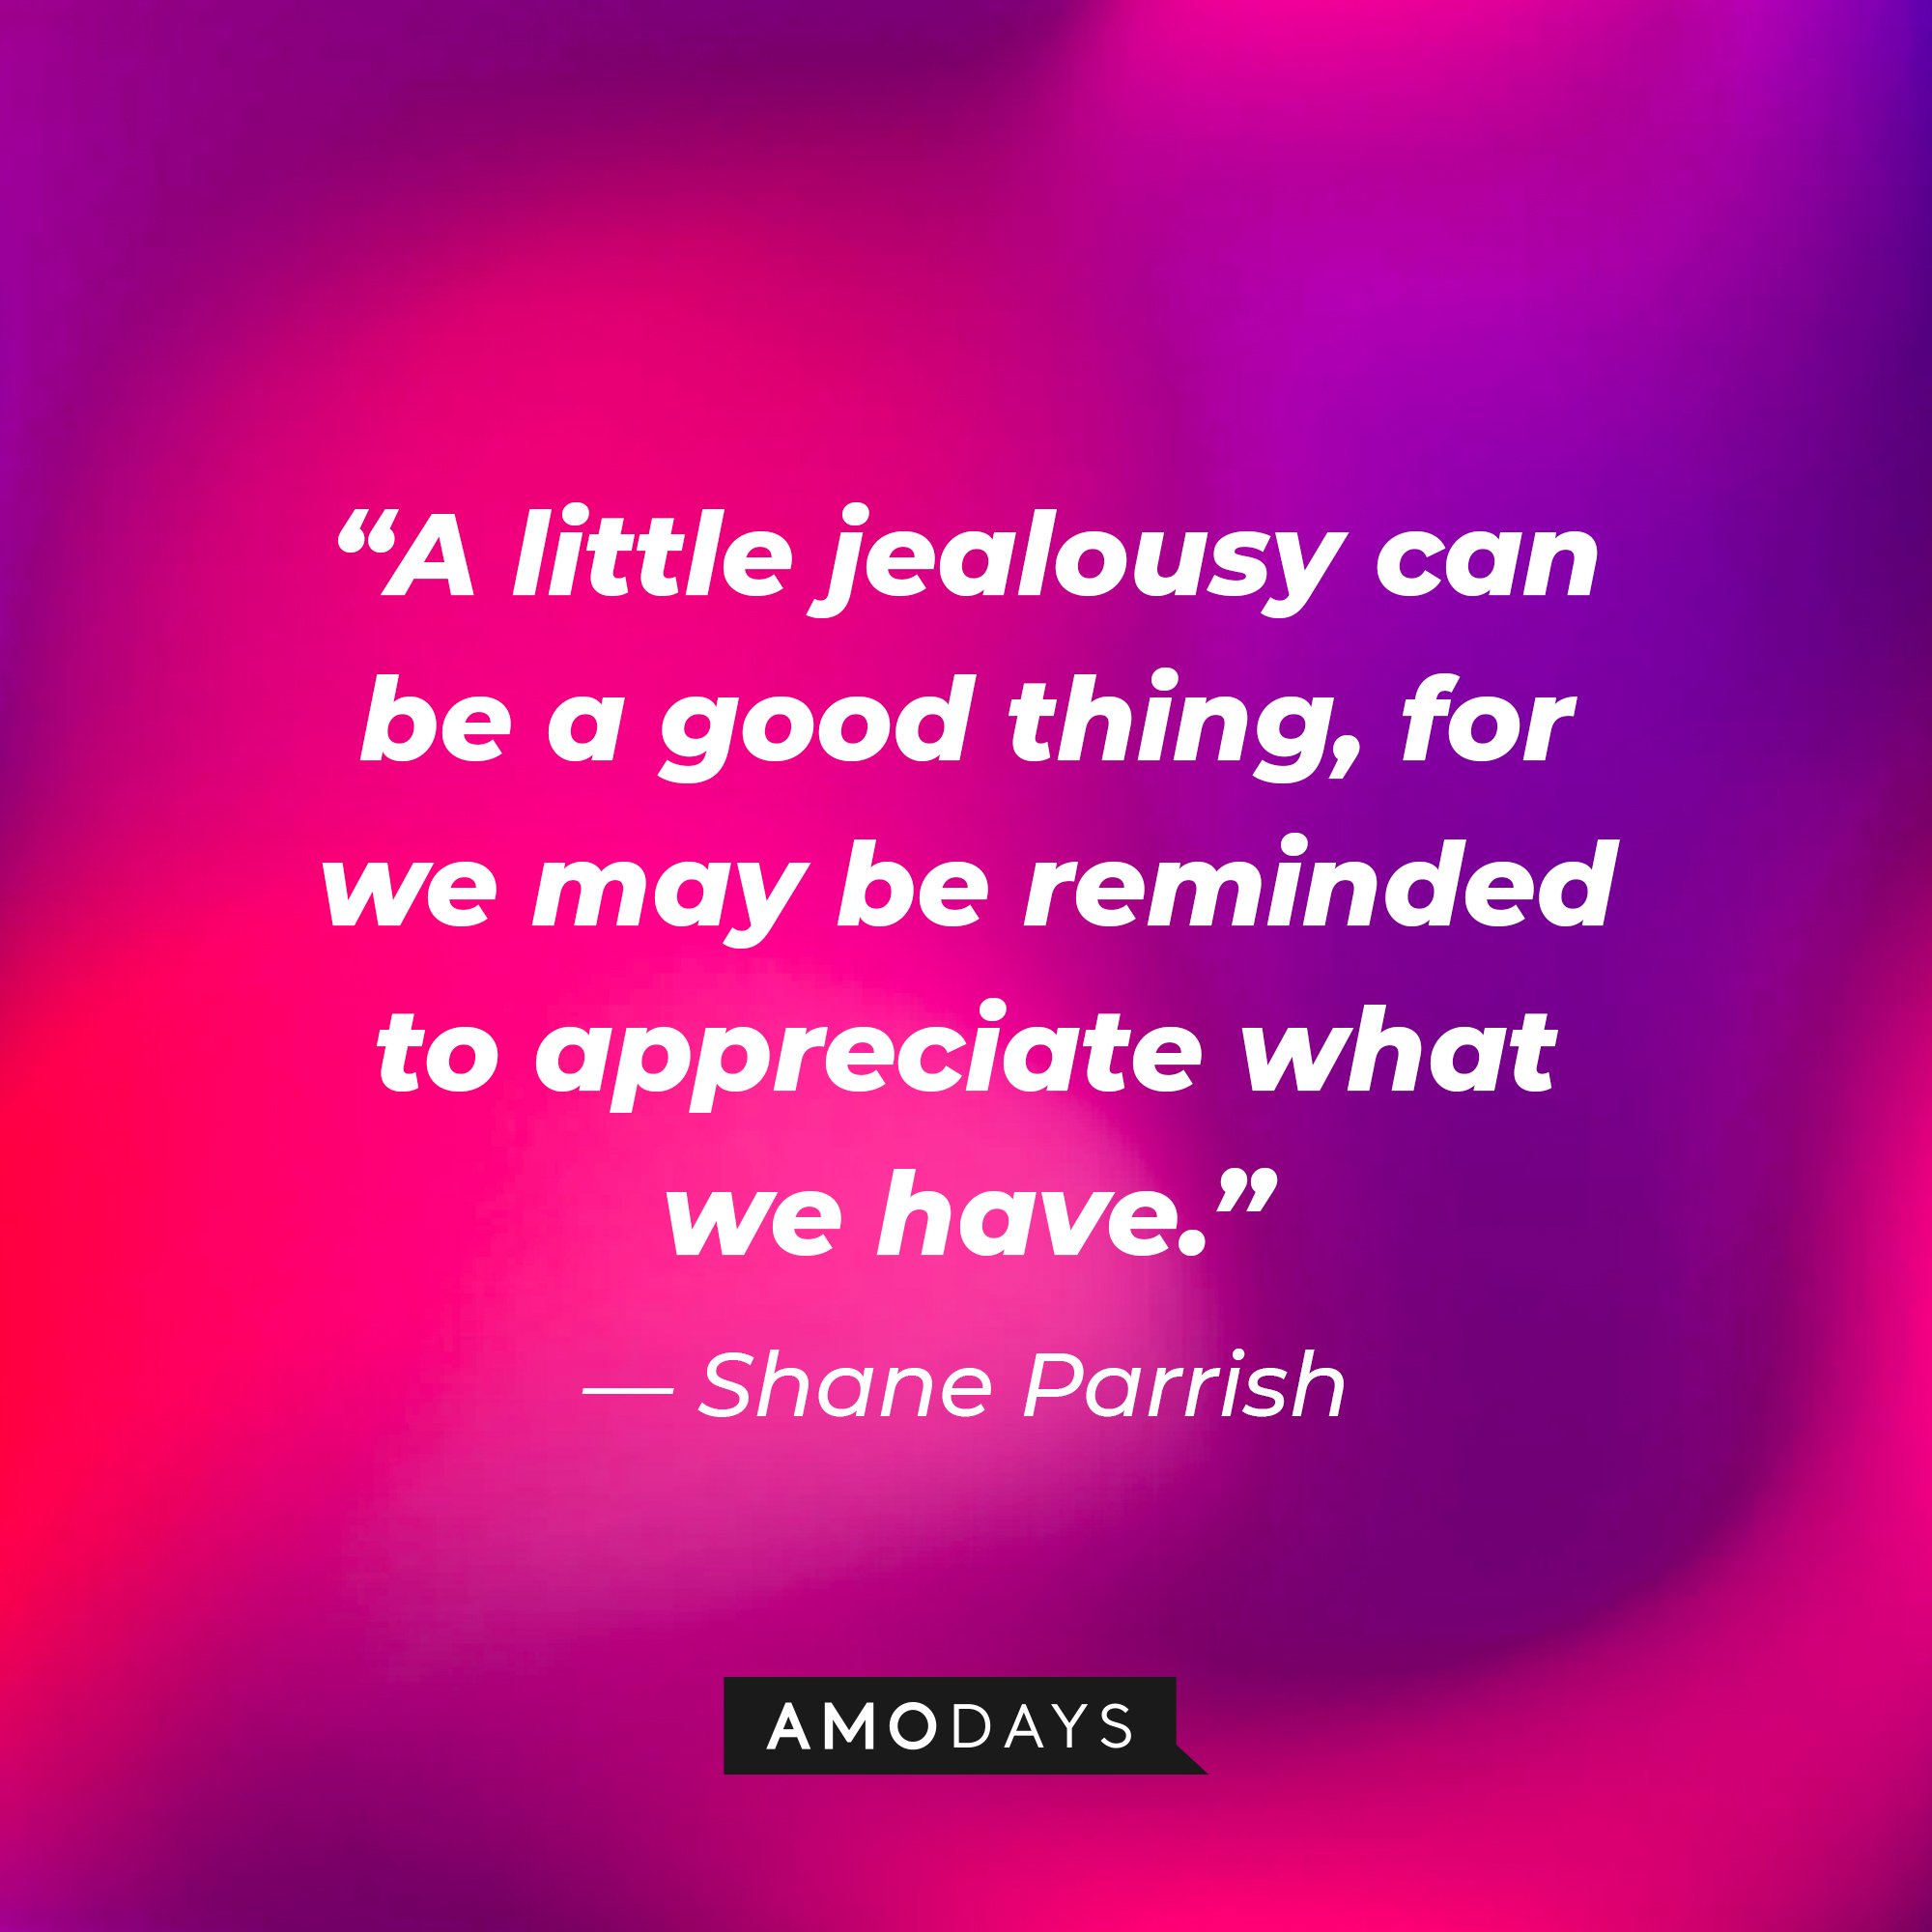 Shane Parrish's quote: “A little jealousy can be a good thing, for we may be reminded to appreciate what we have.” | Image: AmoDays